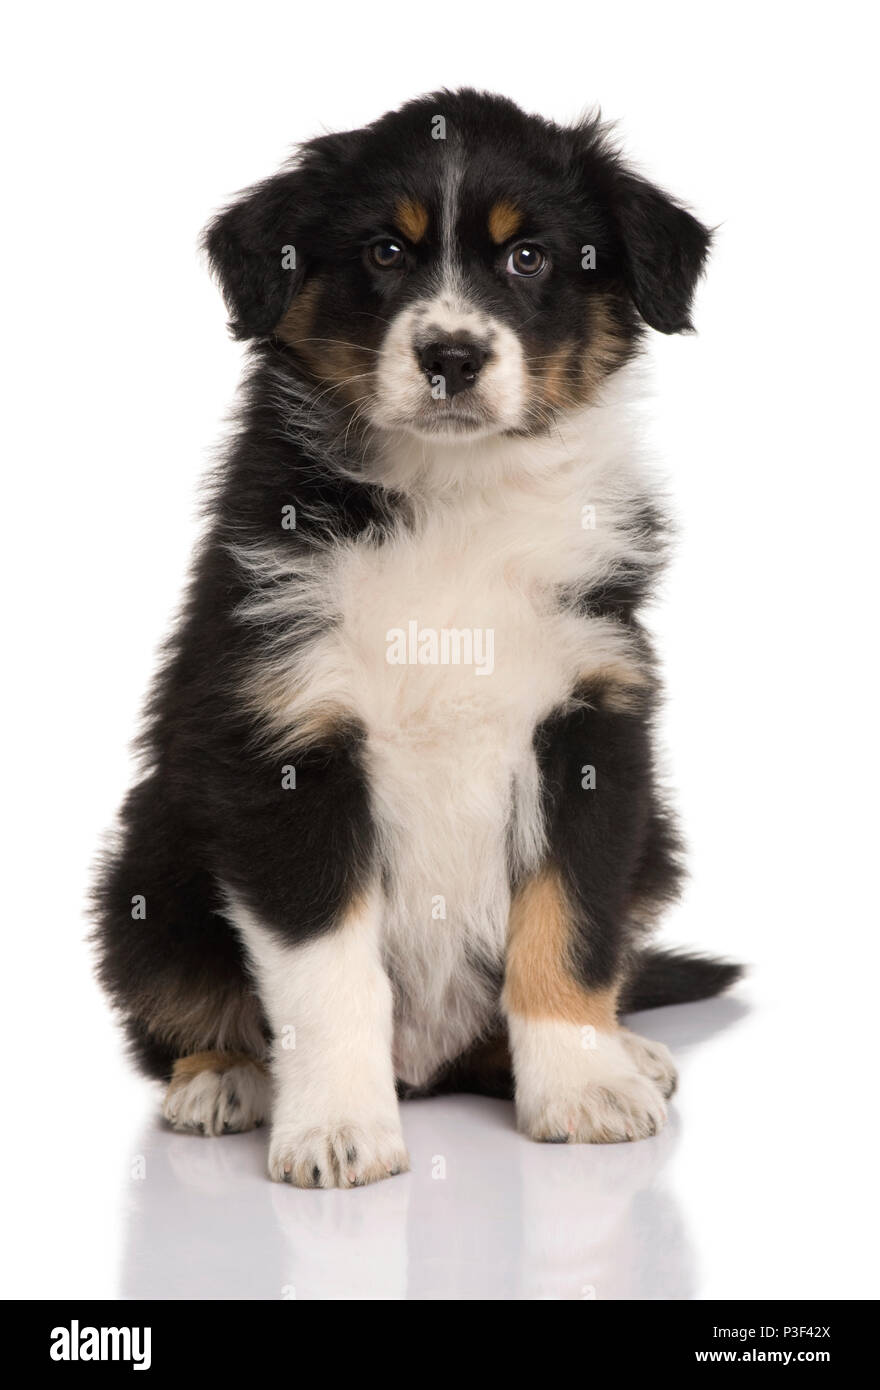 Australian Shepherd puppy, 8 weeks old, sitting in front of white background Stock Photo